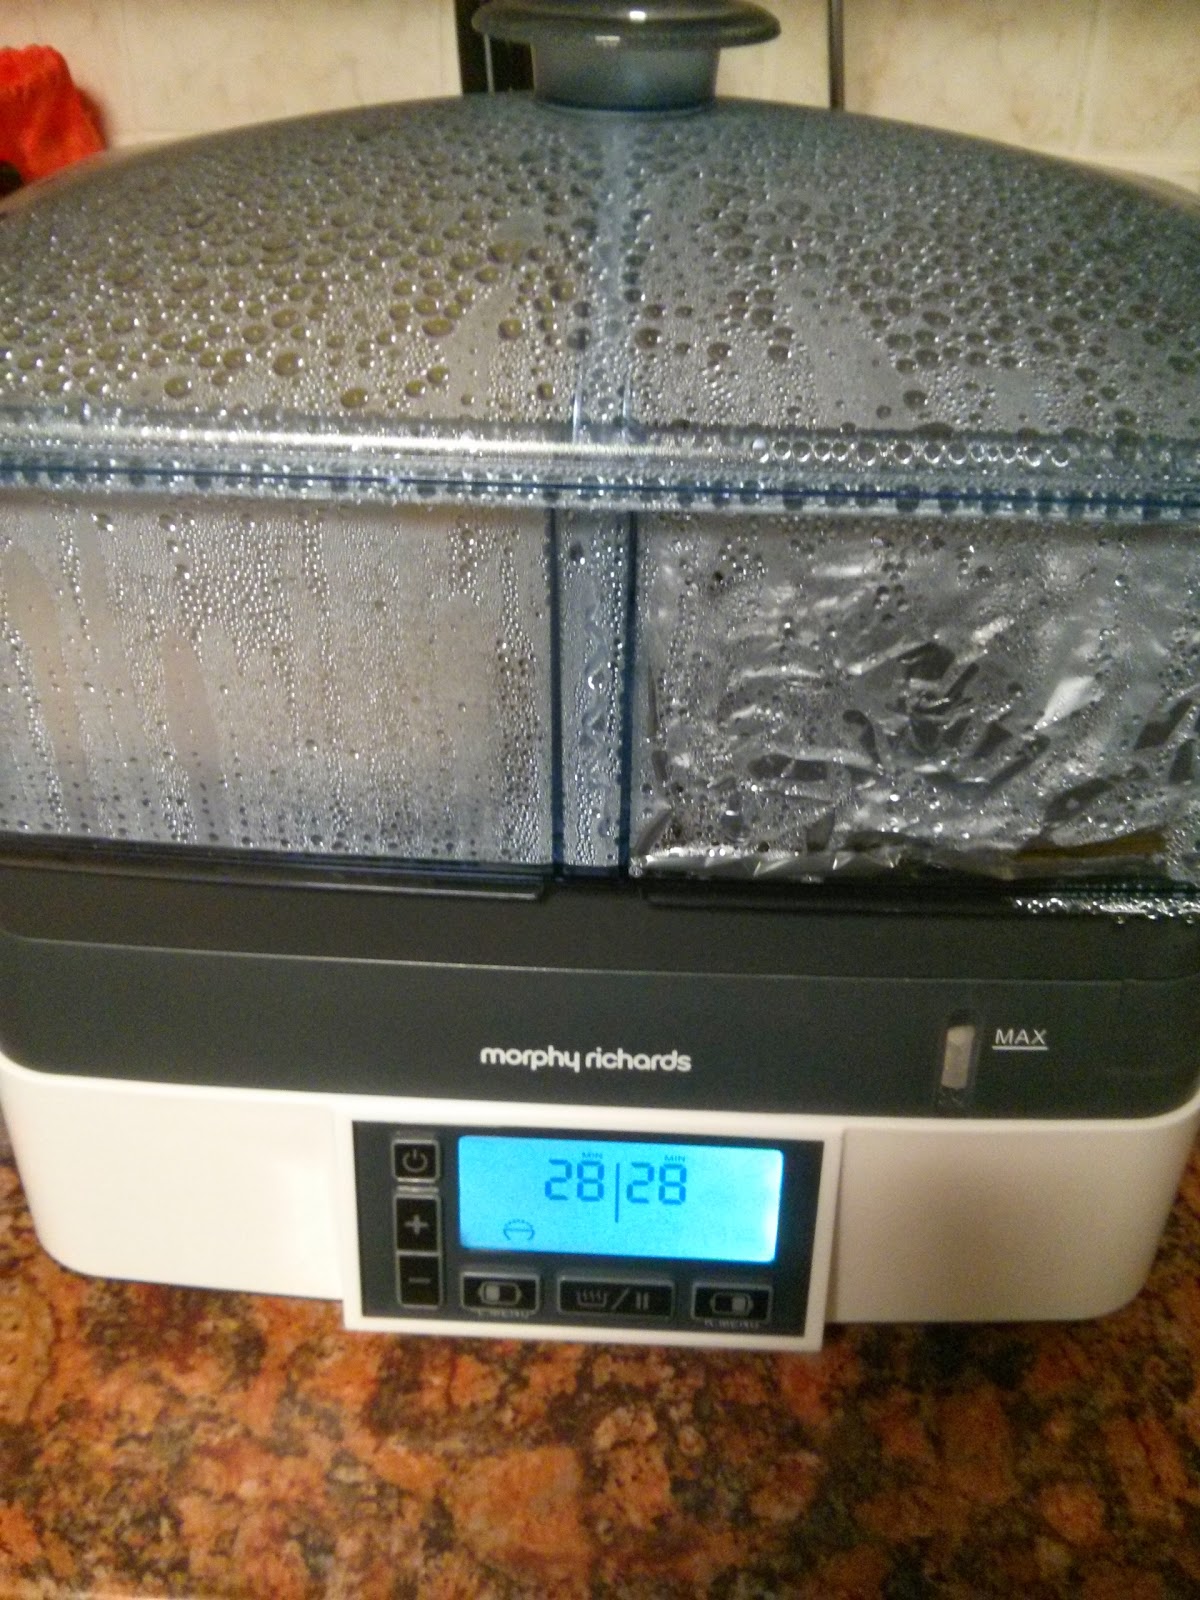 The Morphy Richards Compact Intellisteam Food Steamer in action